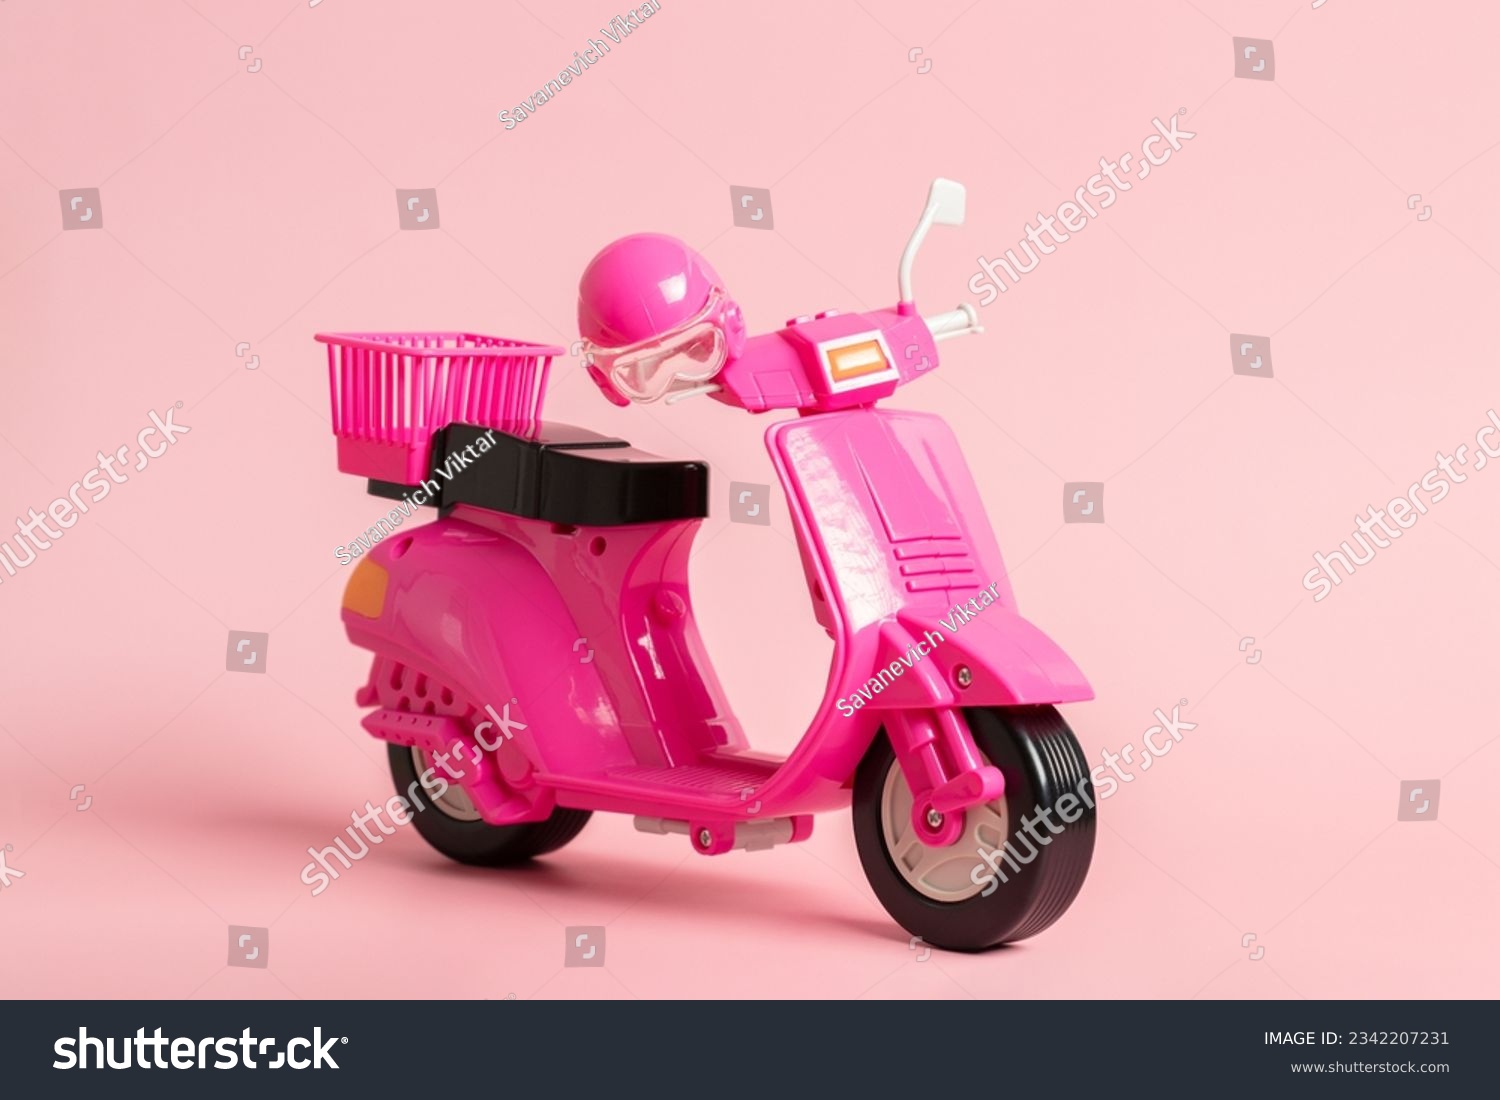 Pink vintage toy doll scooter or motorbike with helmet on pastel pink background. 80s, clsssic, retro style #2342207231